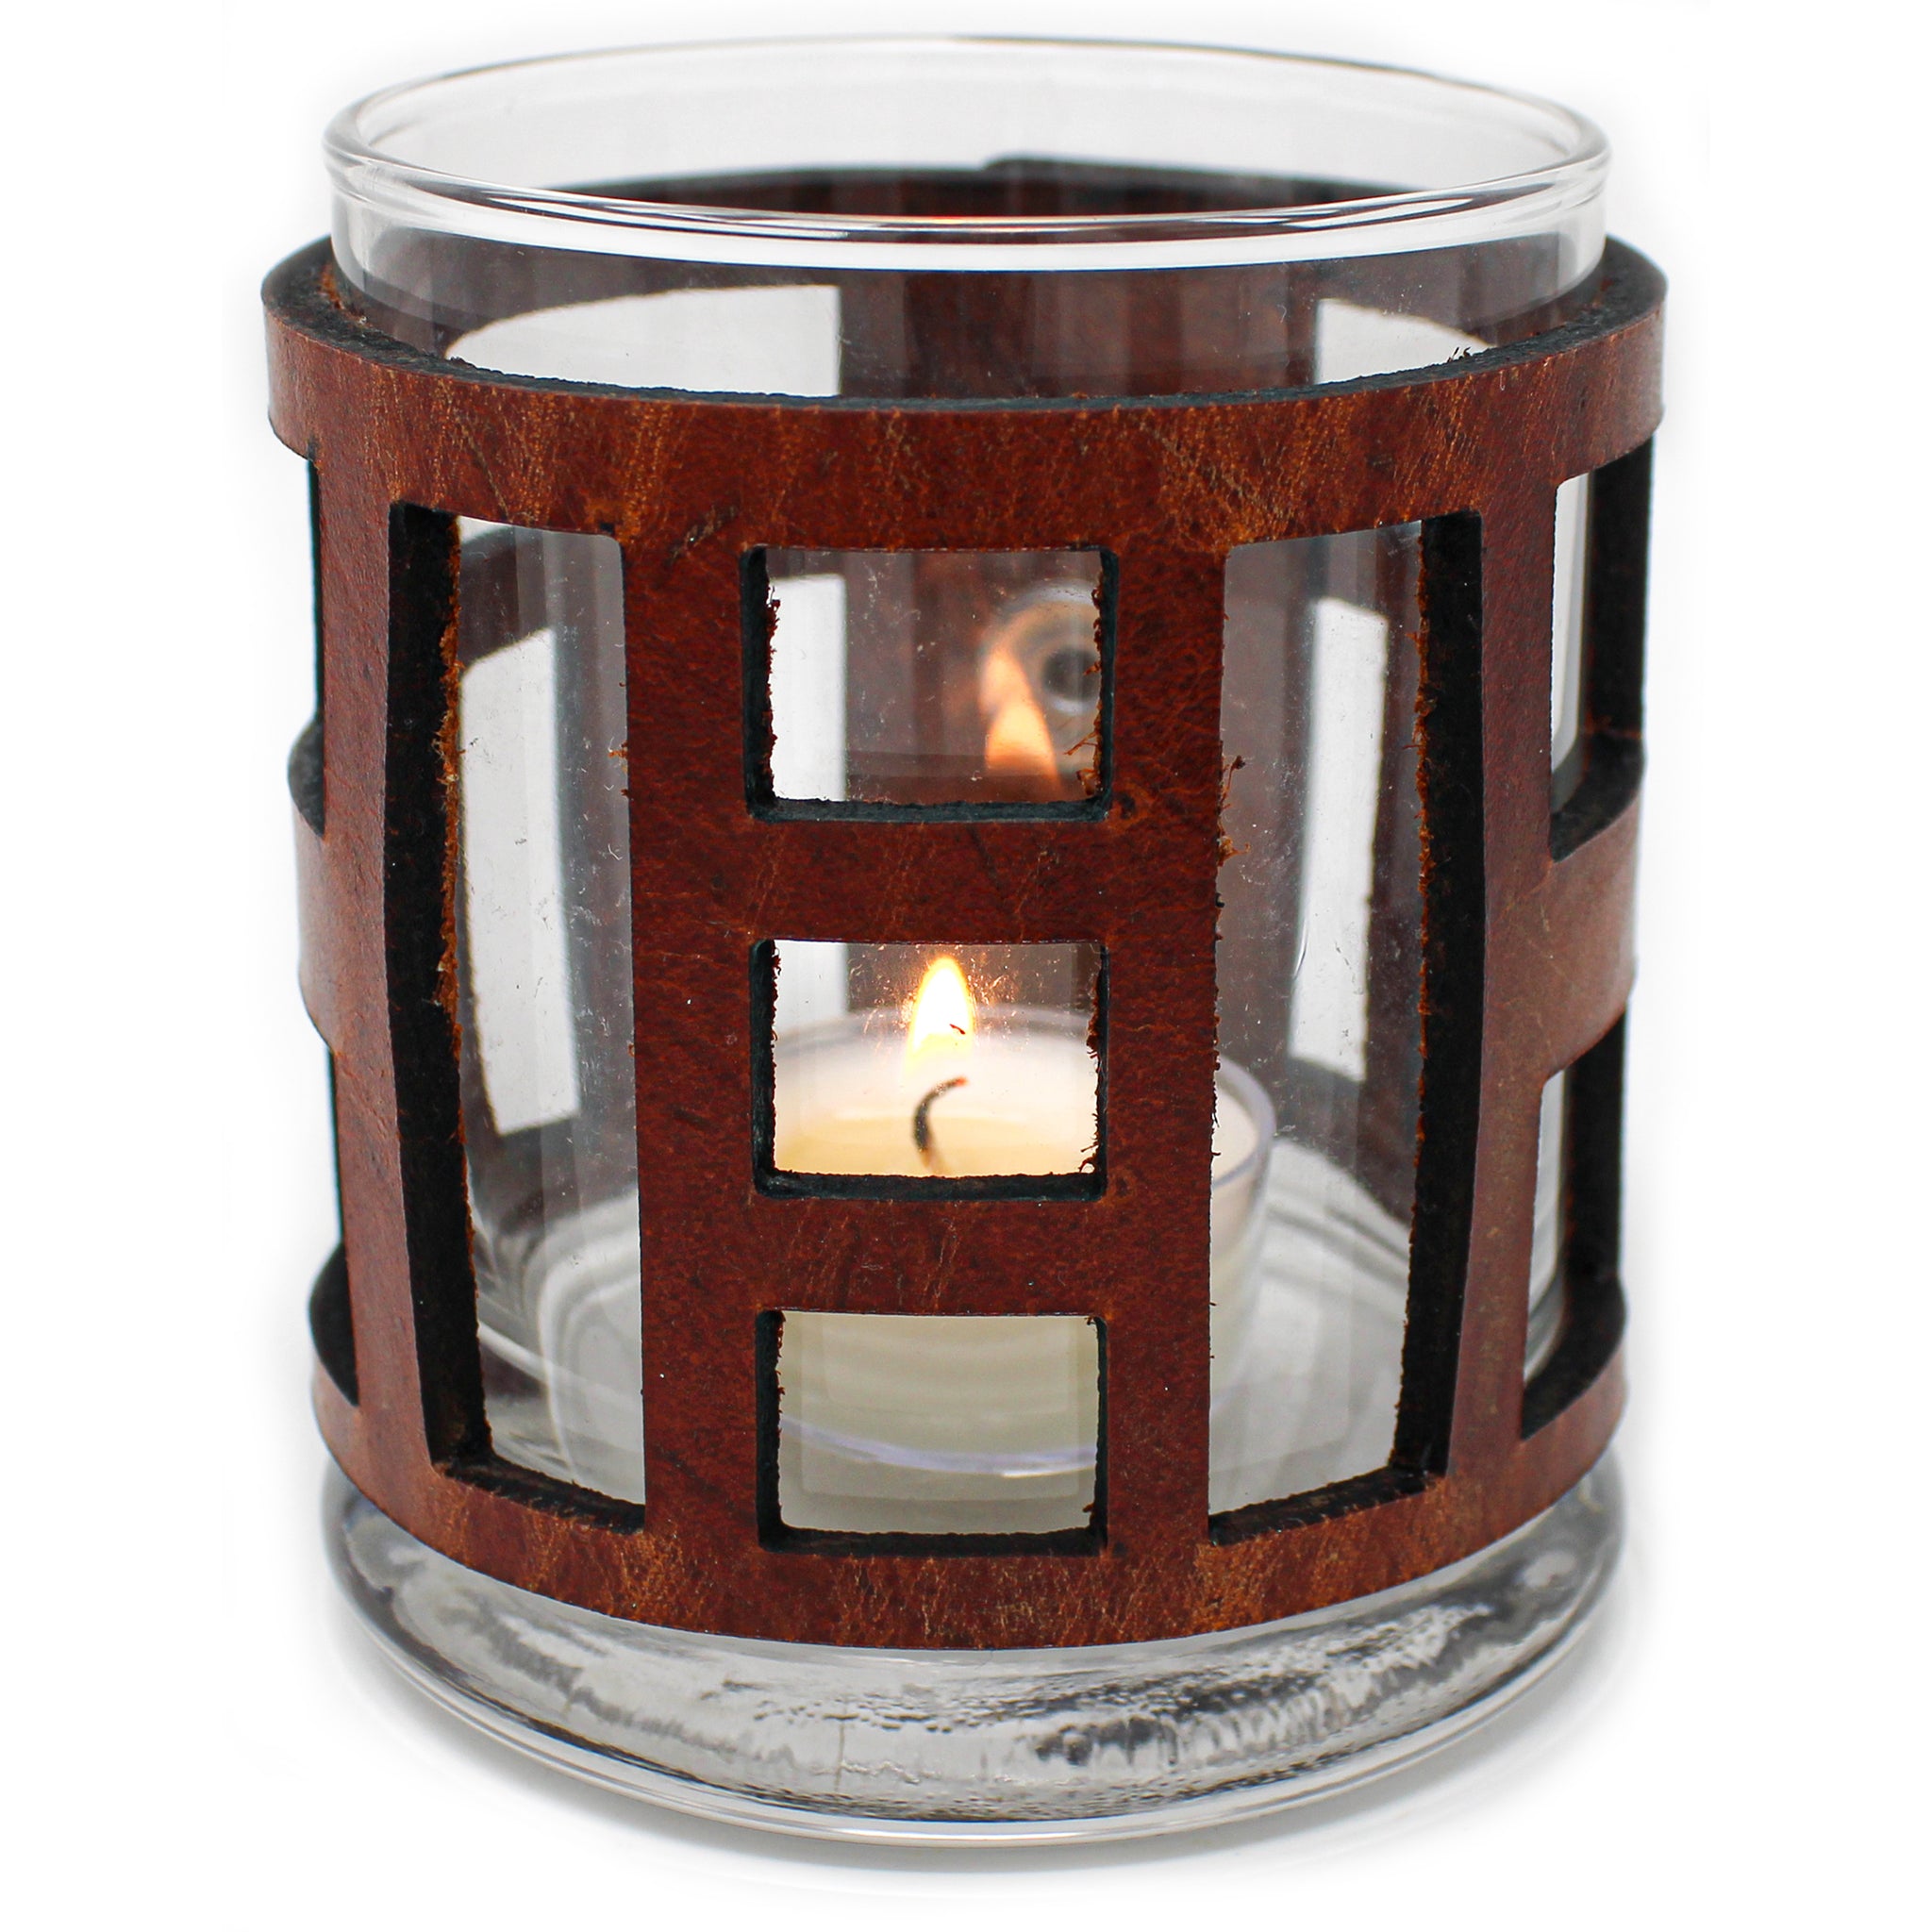 Leather Luminary Candle Set - Rectangles Repeat